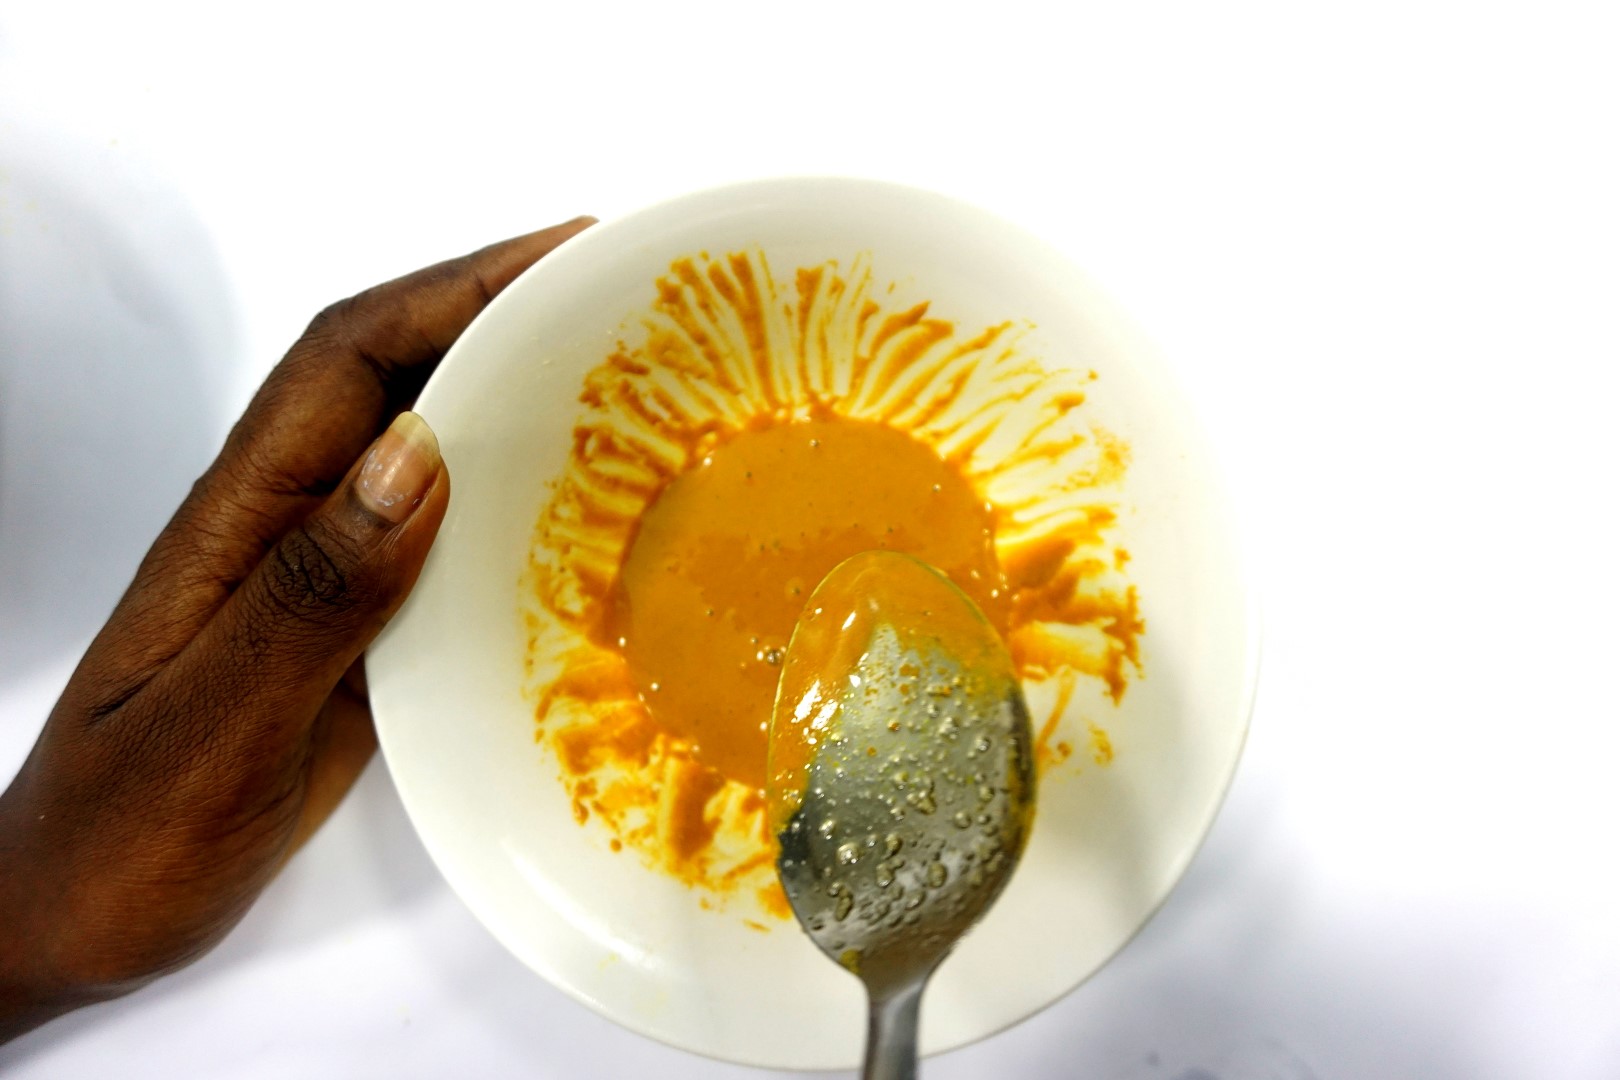 Turmeric and honey mixed together for DIY homemade face mask